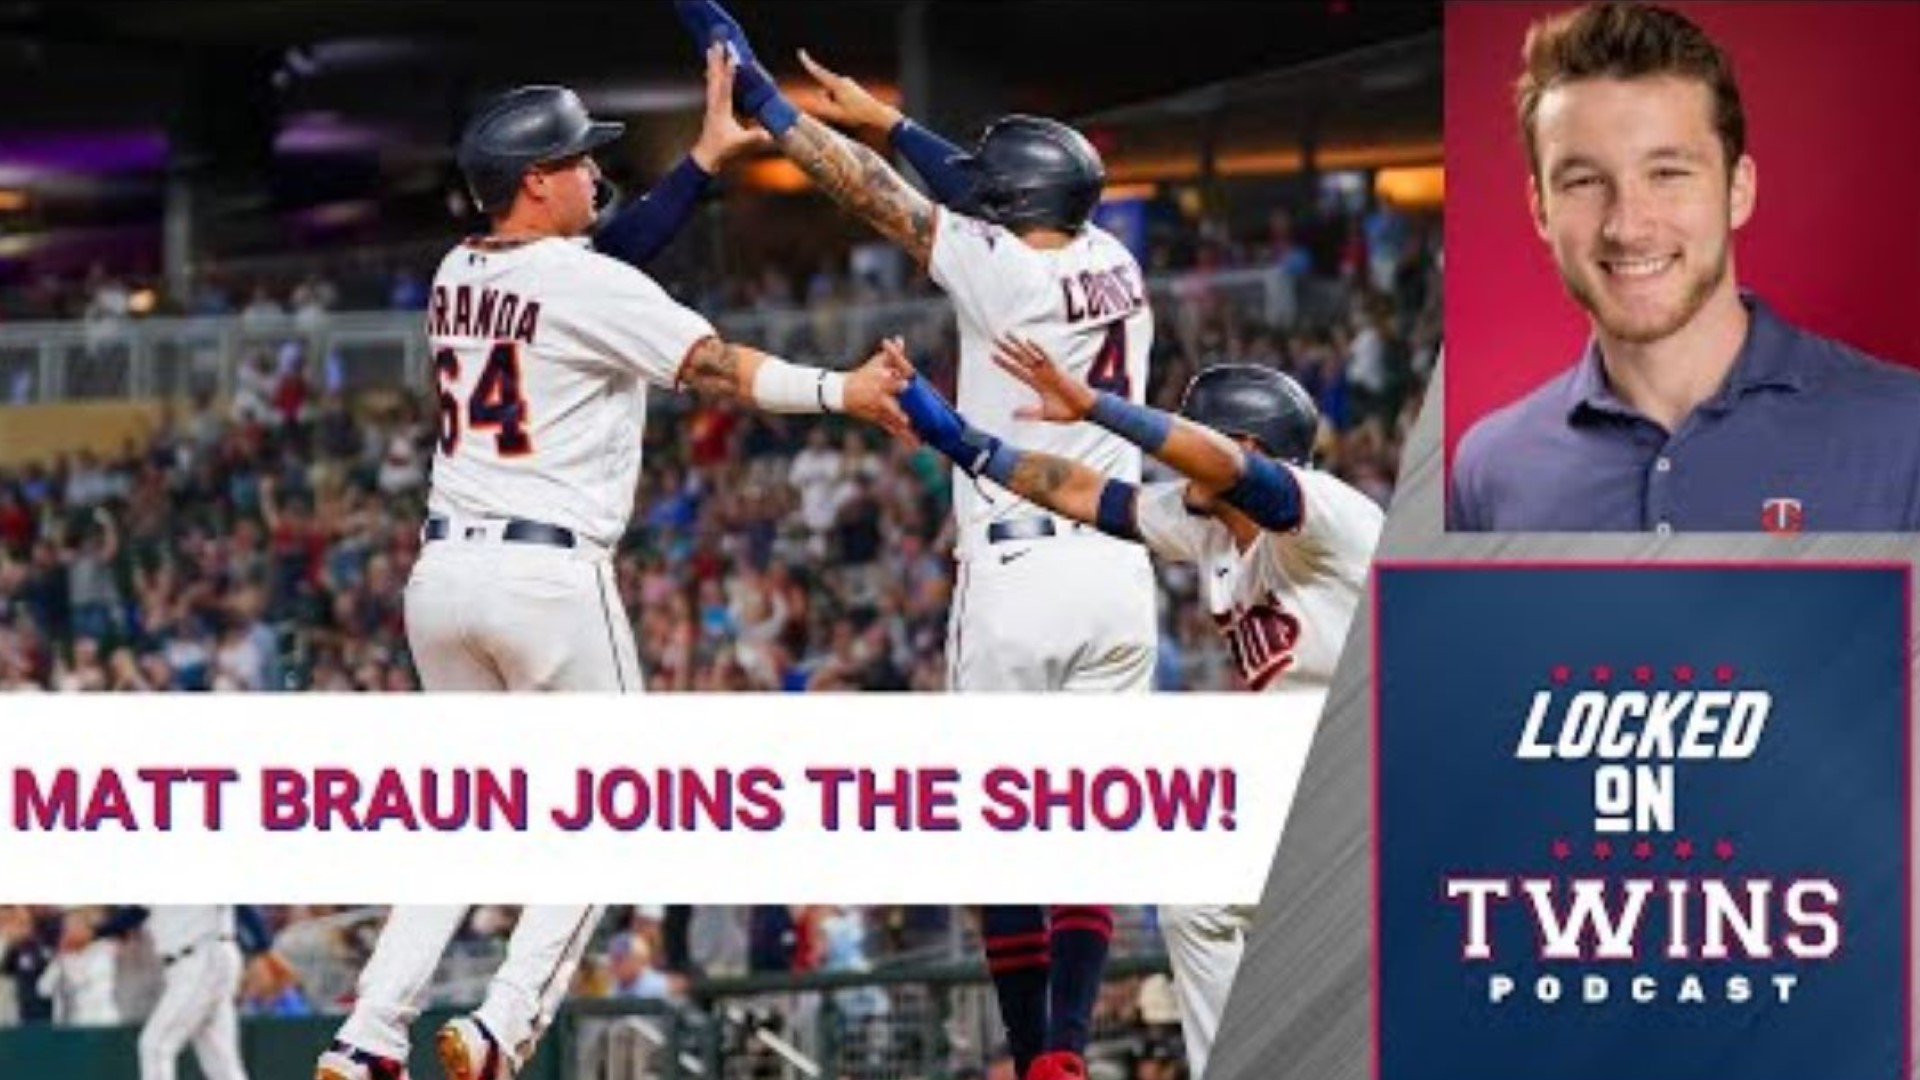 Twins Daily's Matt Braun joins the show to discuss the Twins' hopes down the stretch, how the team looks beyond 2022, and the state of the farm system.